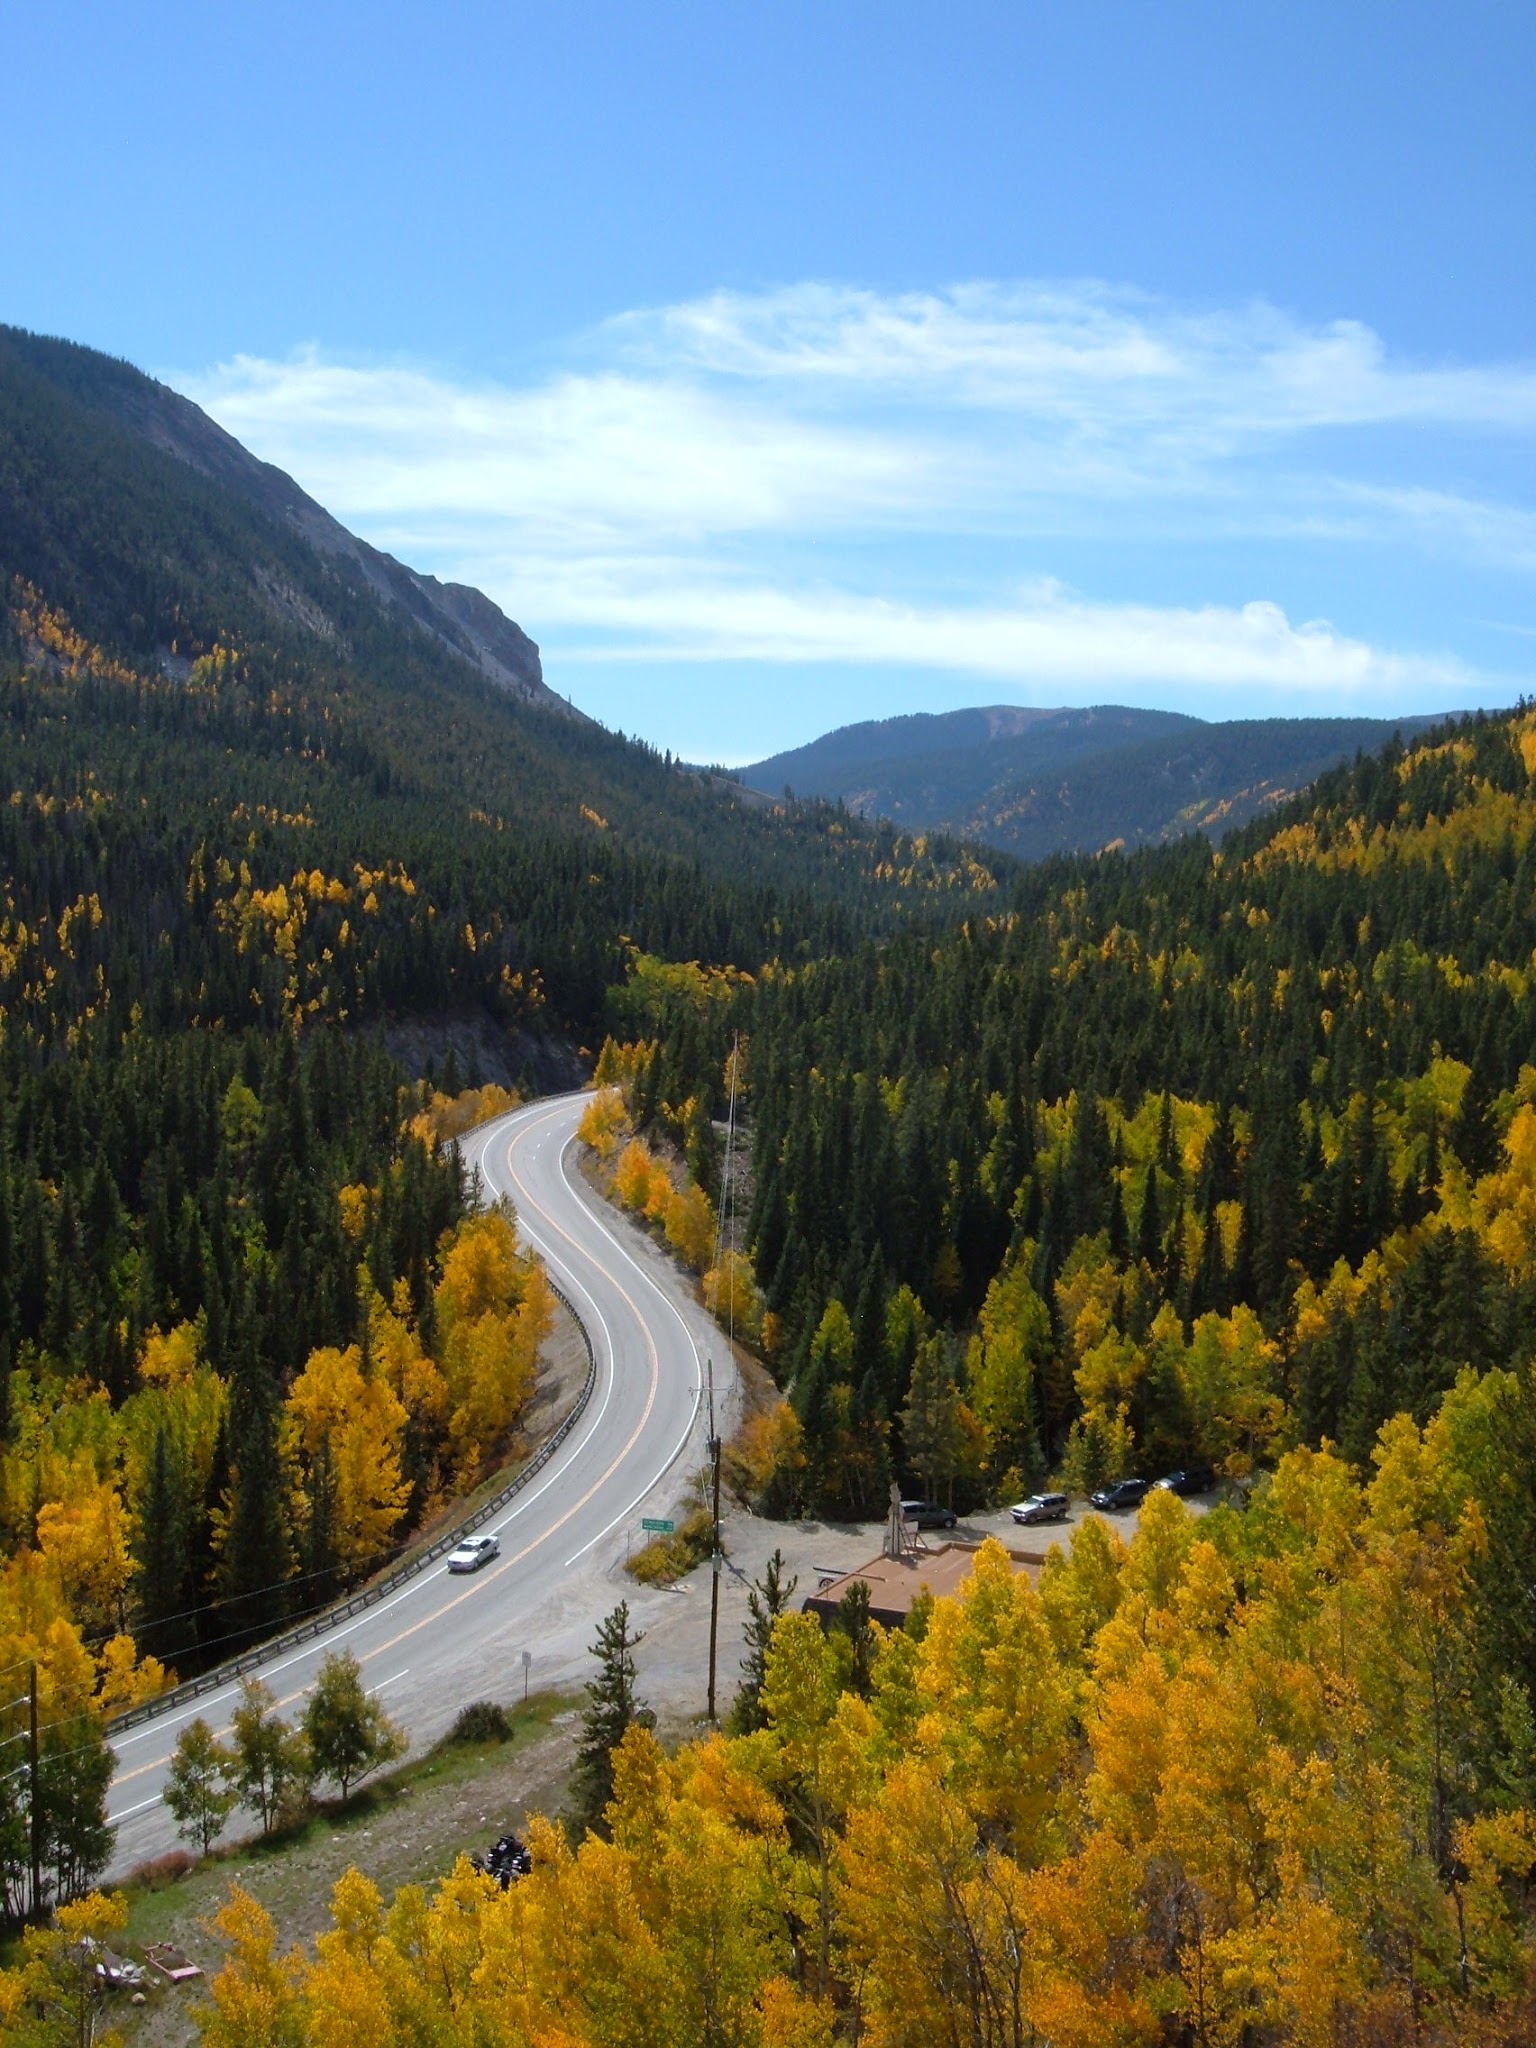 Most beautiful view looking down upon Monarch Pass with the fall colors at its peak.